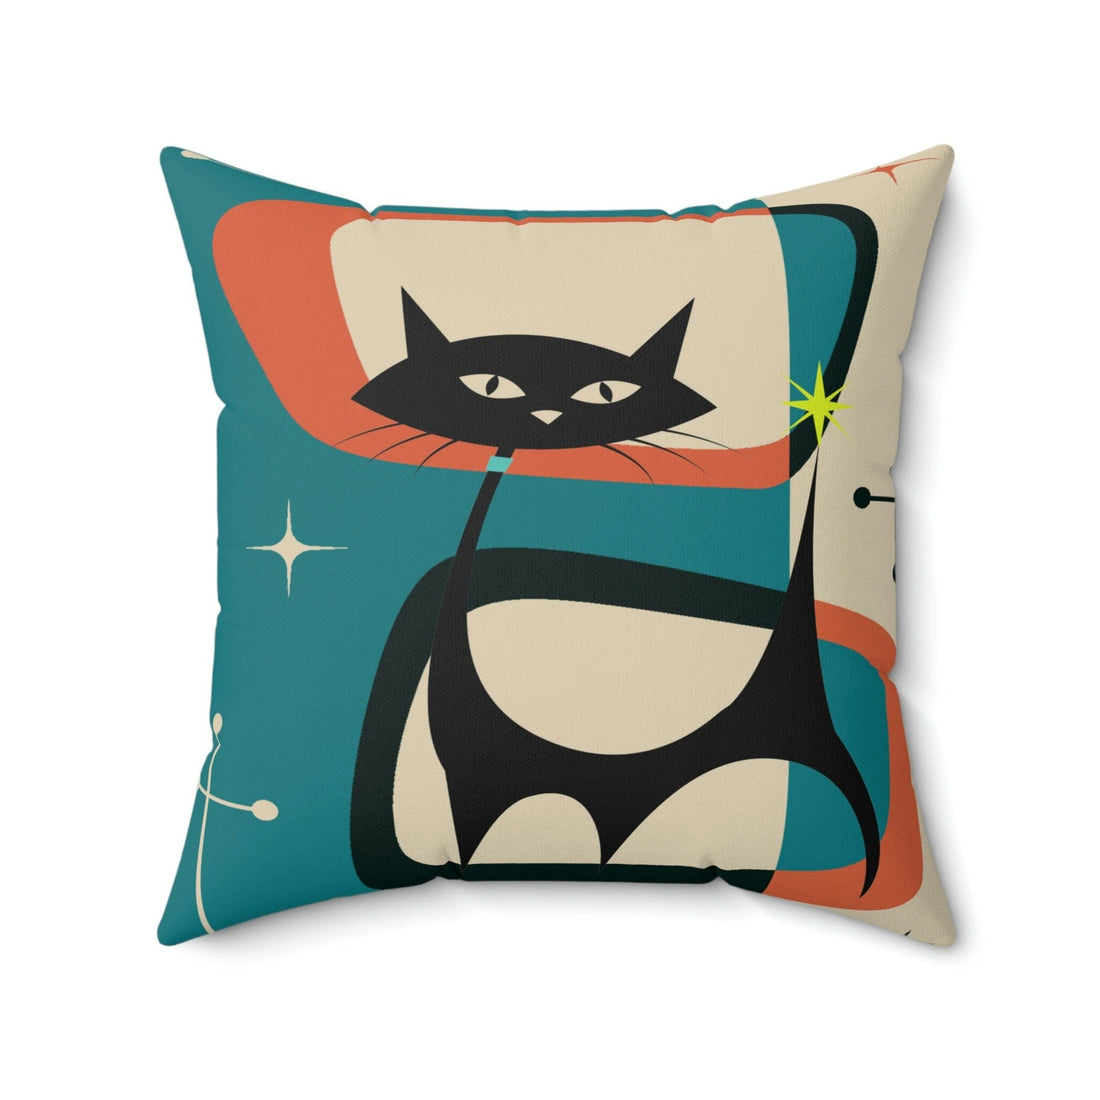 Kate McEnroe New York Retro Atomic Black Cat Throw Pillow Cover, Teal Blue, Cream, Burnt Orange Mid Century Modern Accent Cushion Cover, MCM Square Pillow CaseThrow Pillow Covers24131748999026110646